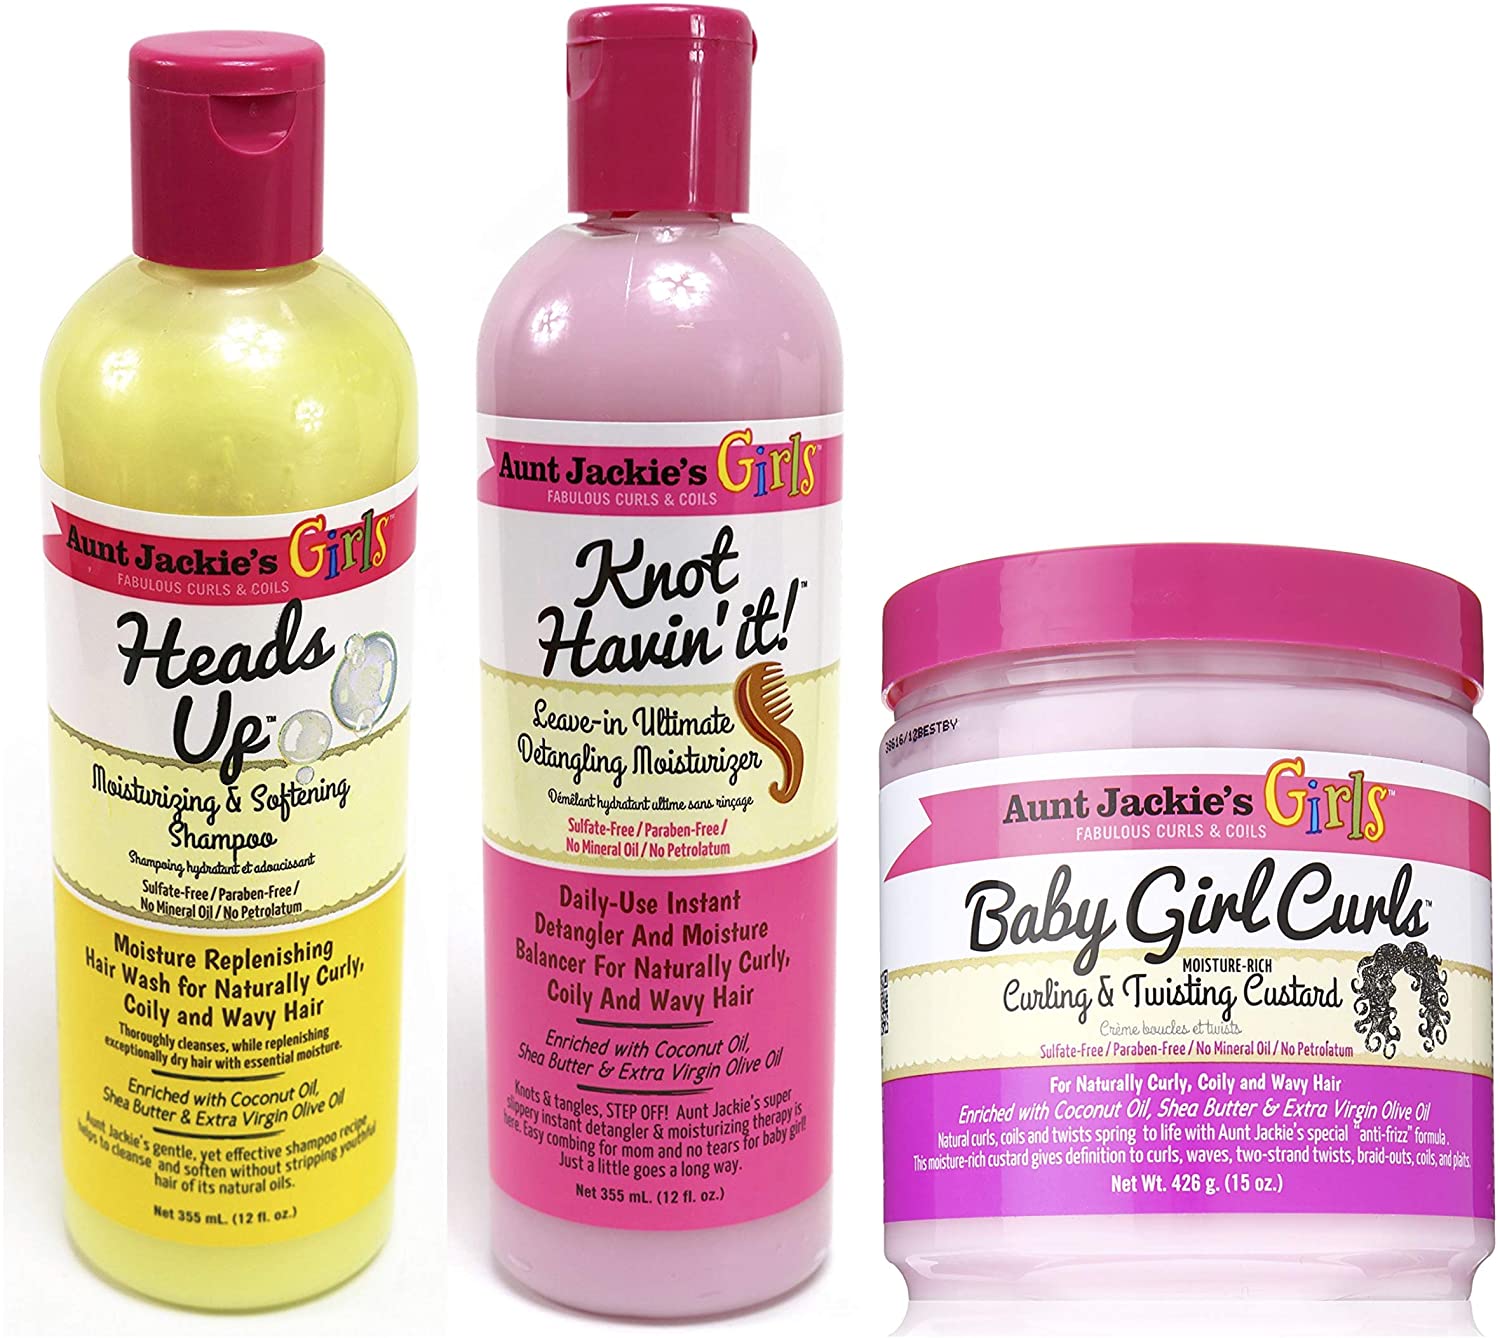 Aunt Jackies Girls! Cleanse, Condition & Moisturise Trio Set of Products for Girls with Fabulous Curls & Coils